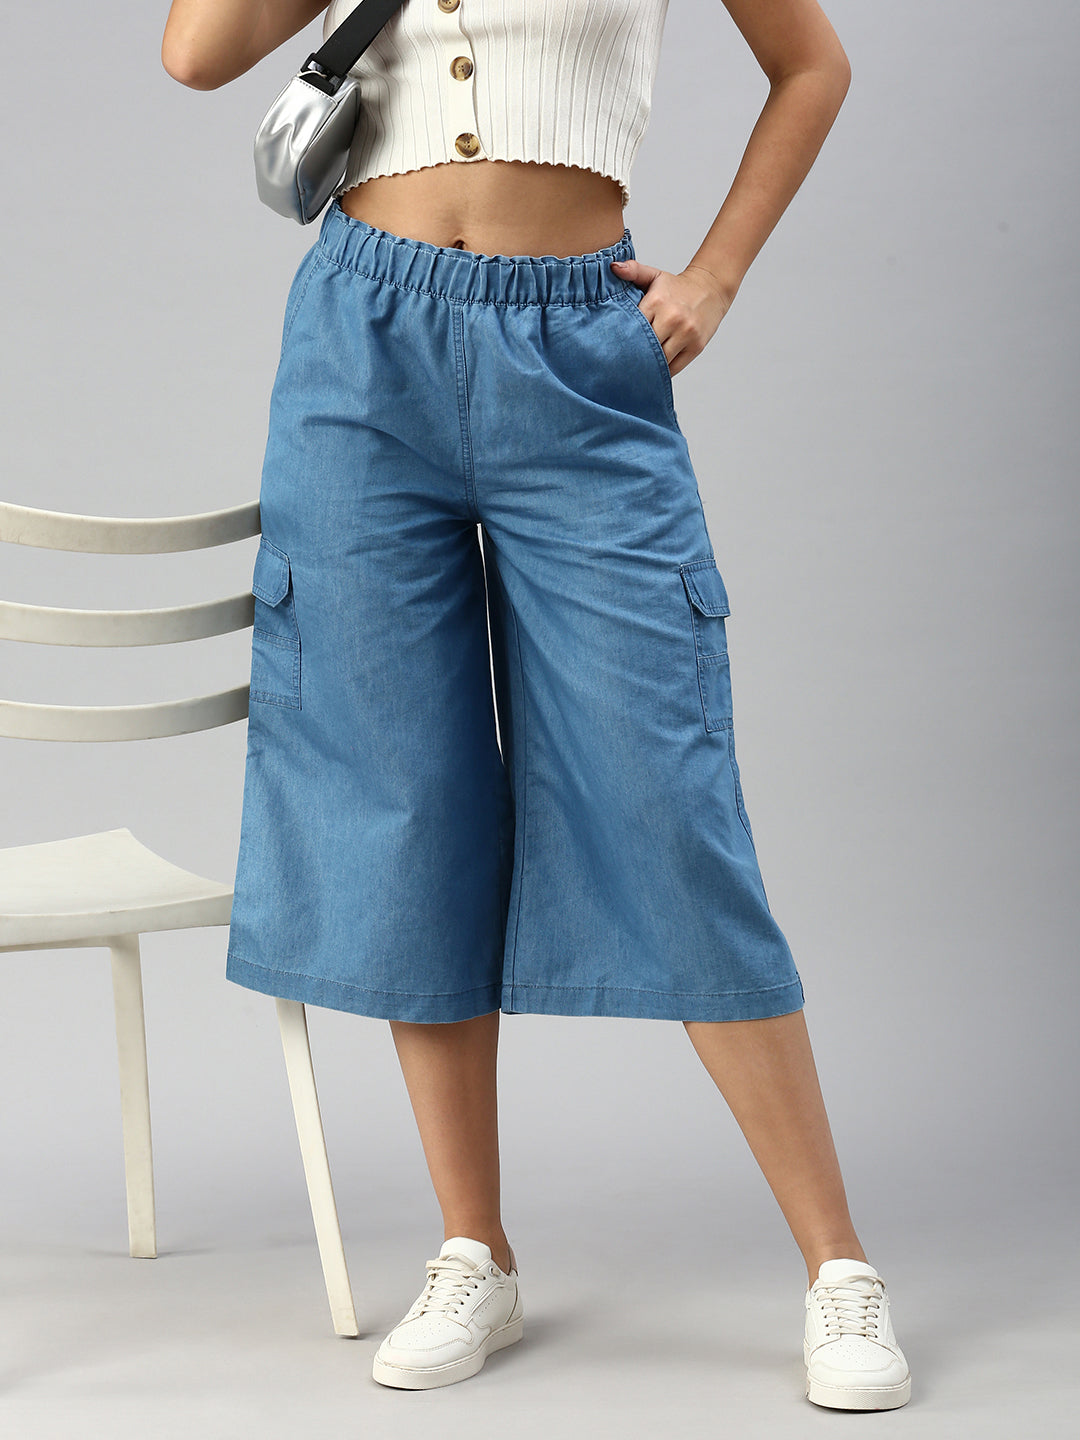 Women's Denim Short Culottes High Waisted Wide Leg Vintage Mini Shorts  Loose Micro Flared Casual Summer Hot Short Pants (Dark Blue,XX-Large) at  Amazon Women's Clothing store